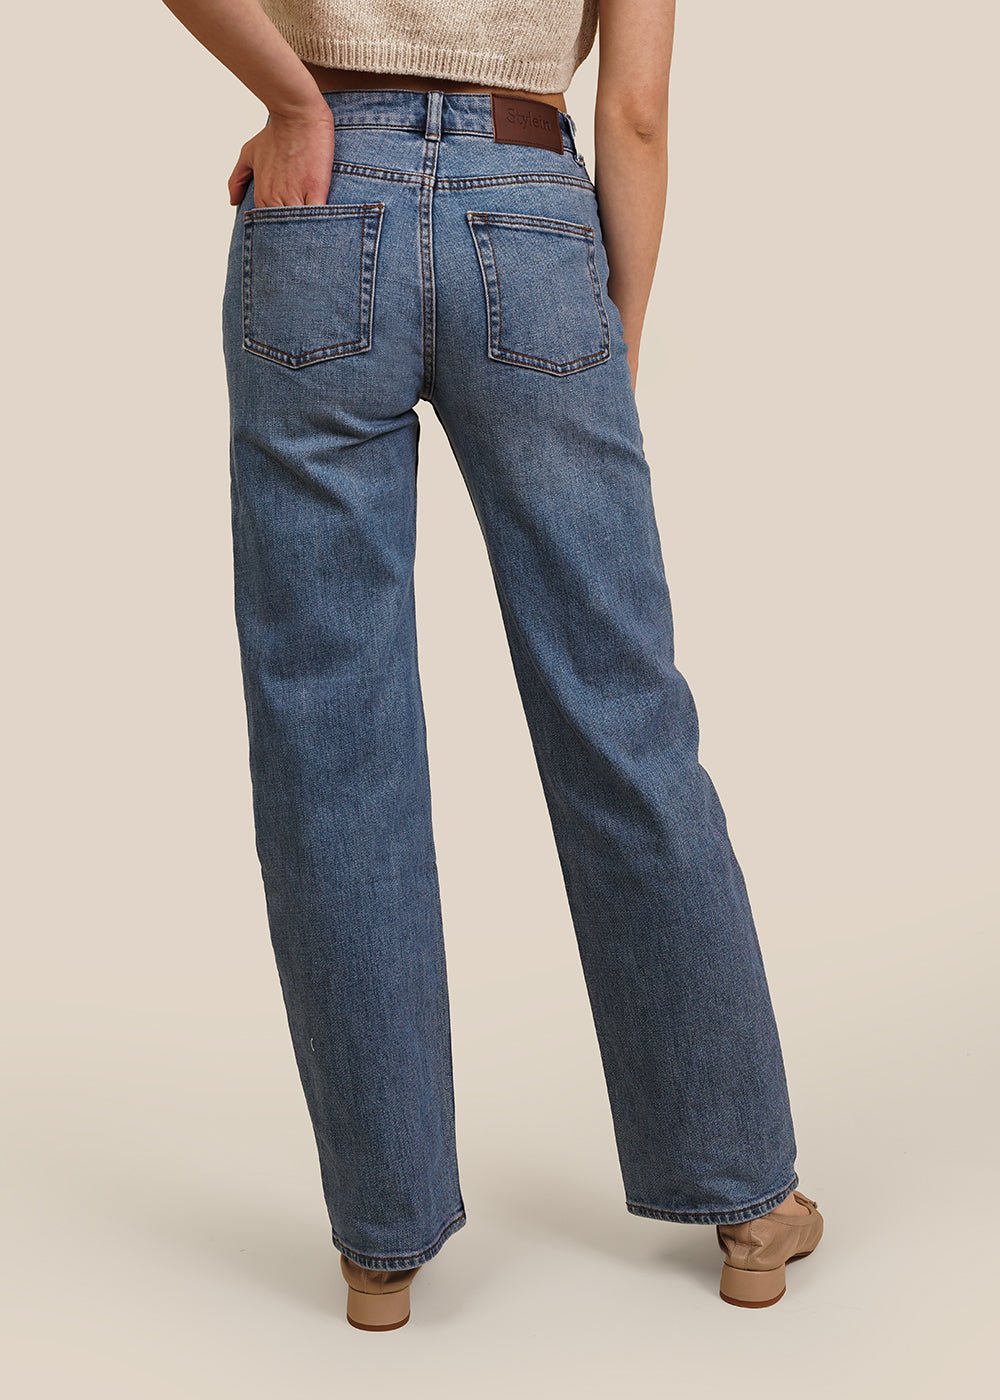 Stylein Blue Kendall Denim Jeans - New Classics Studios Sustainable Ethical Fashion Canada